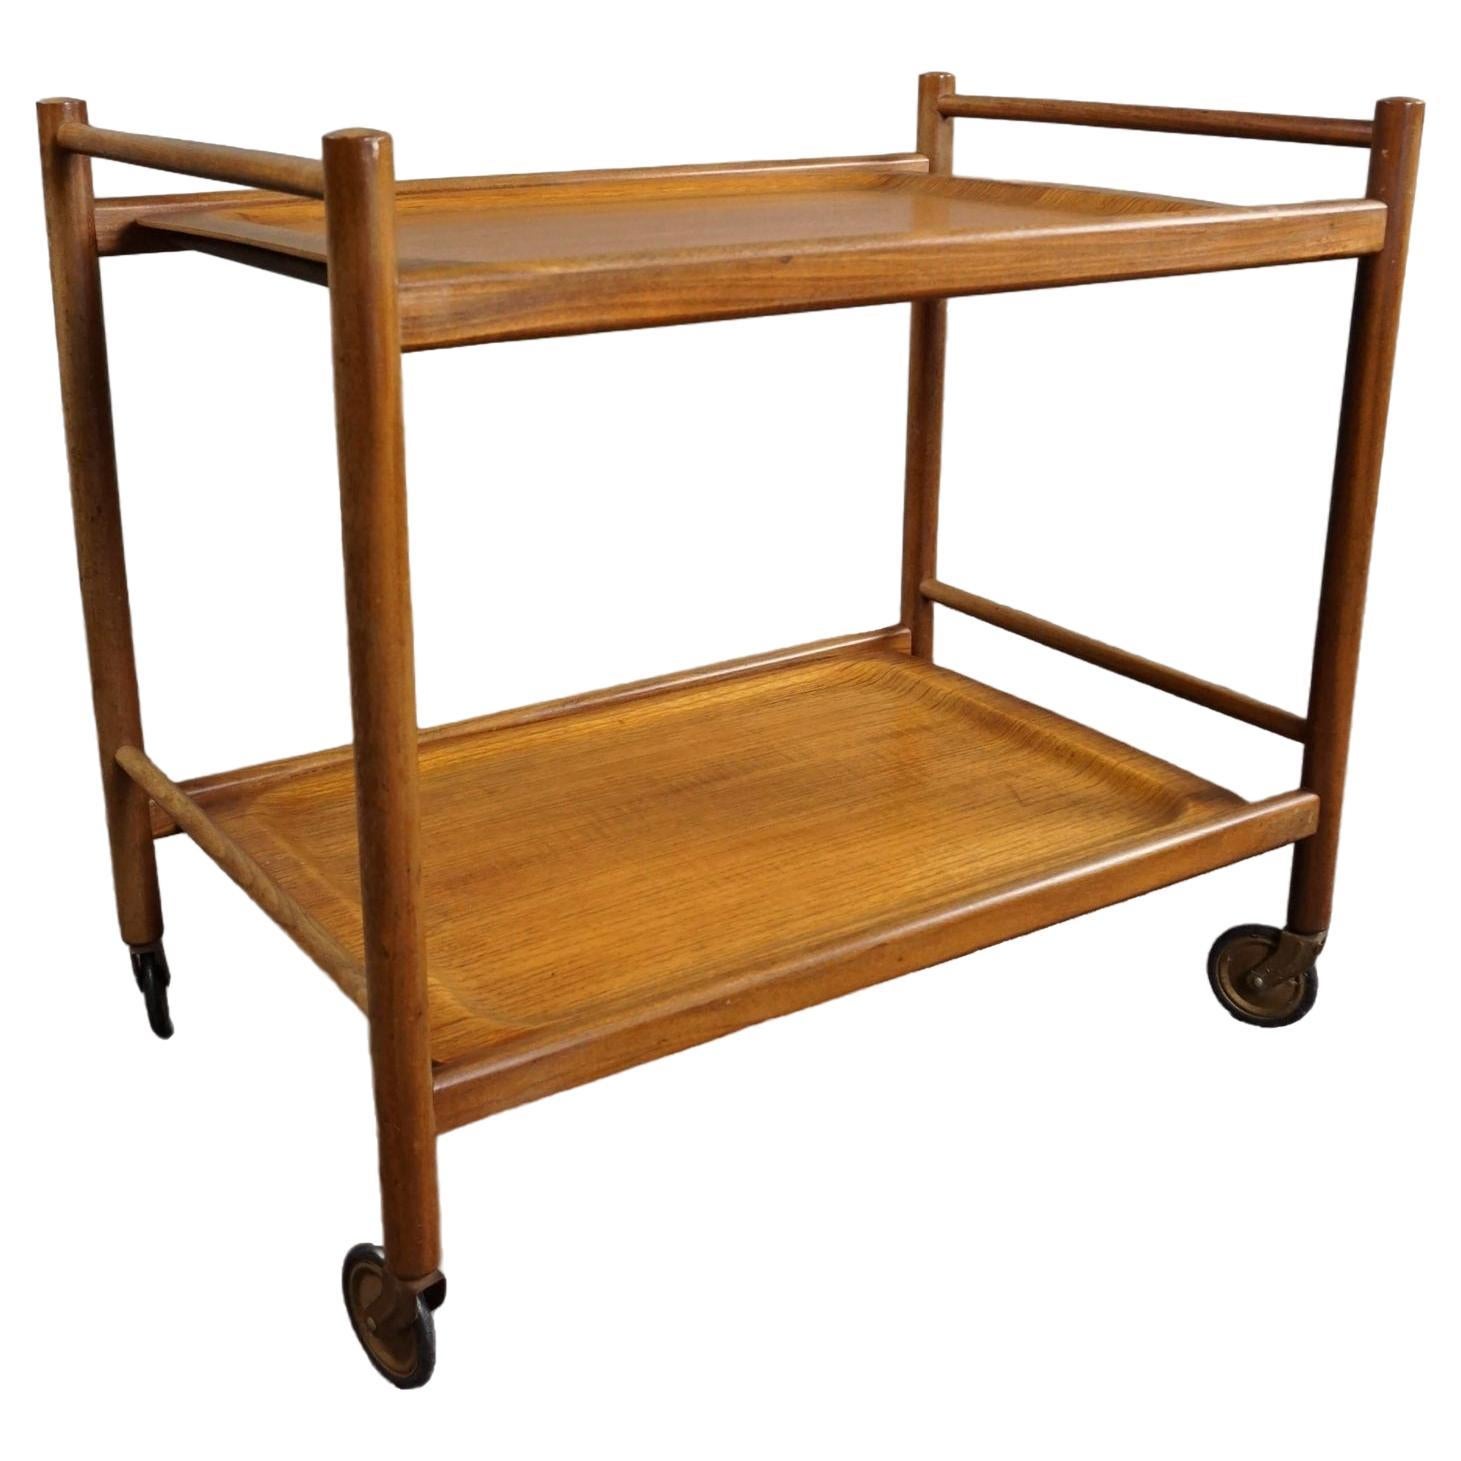 Pastoe trolley / serving trolley, with removable trays